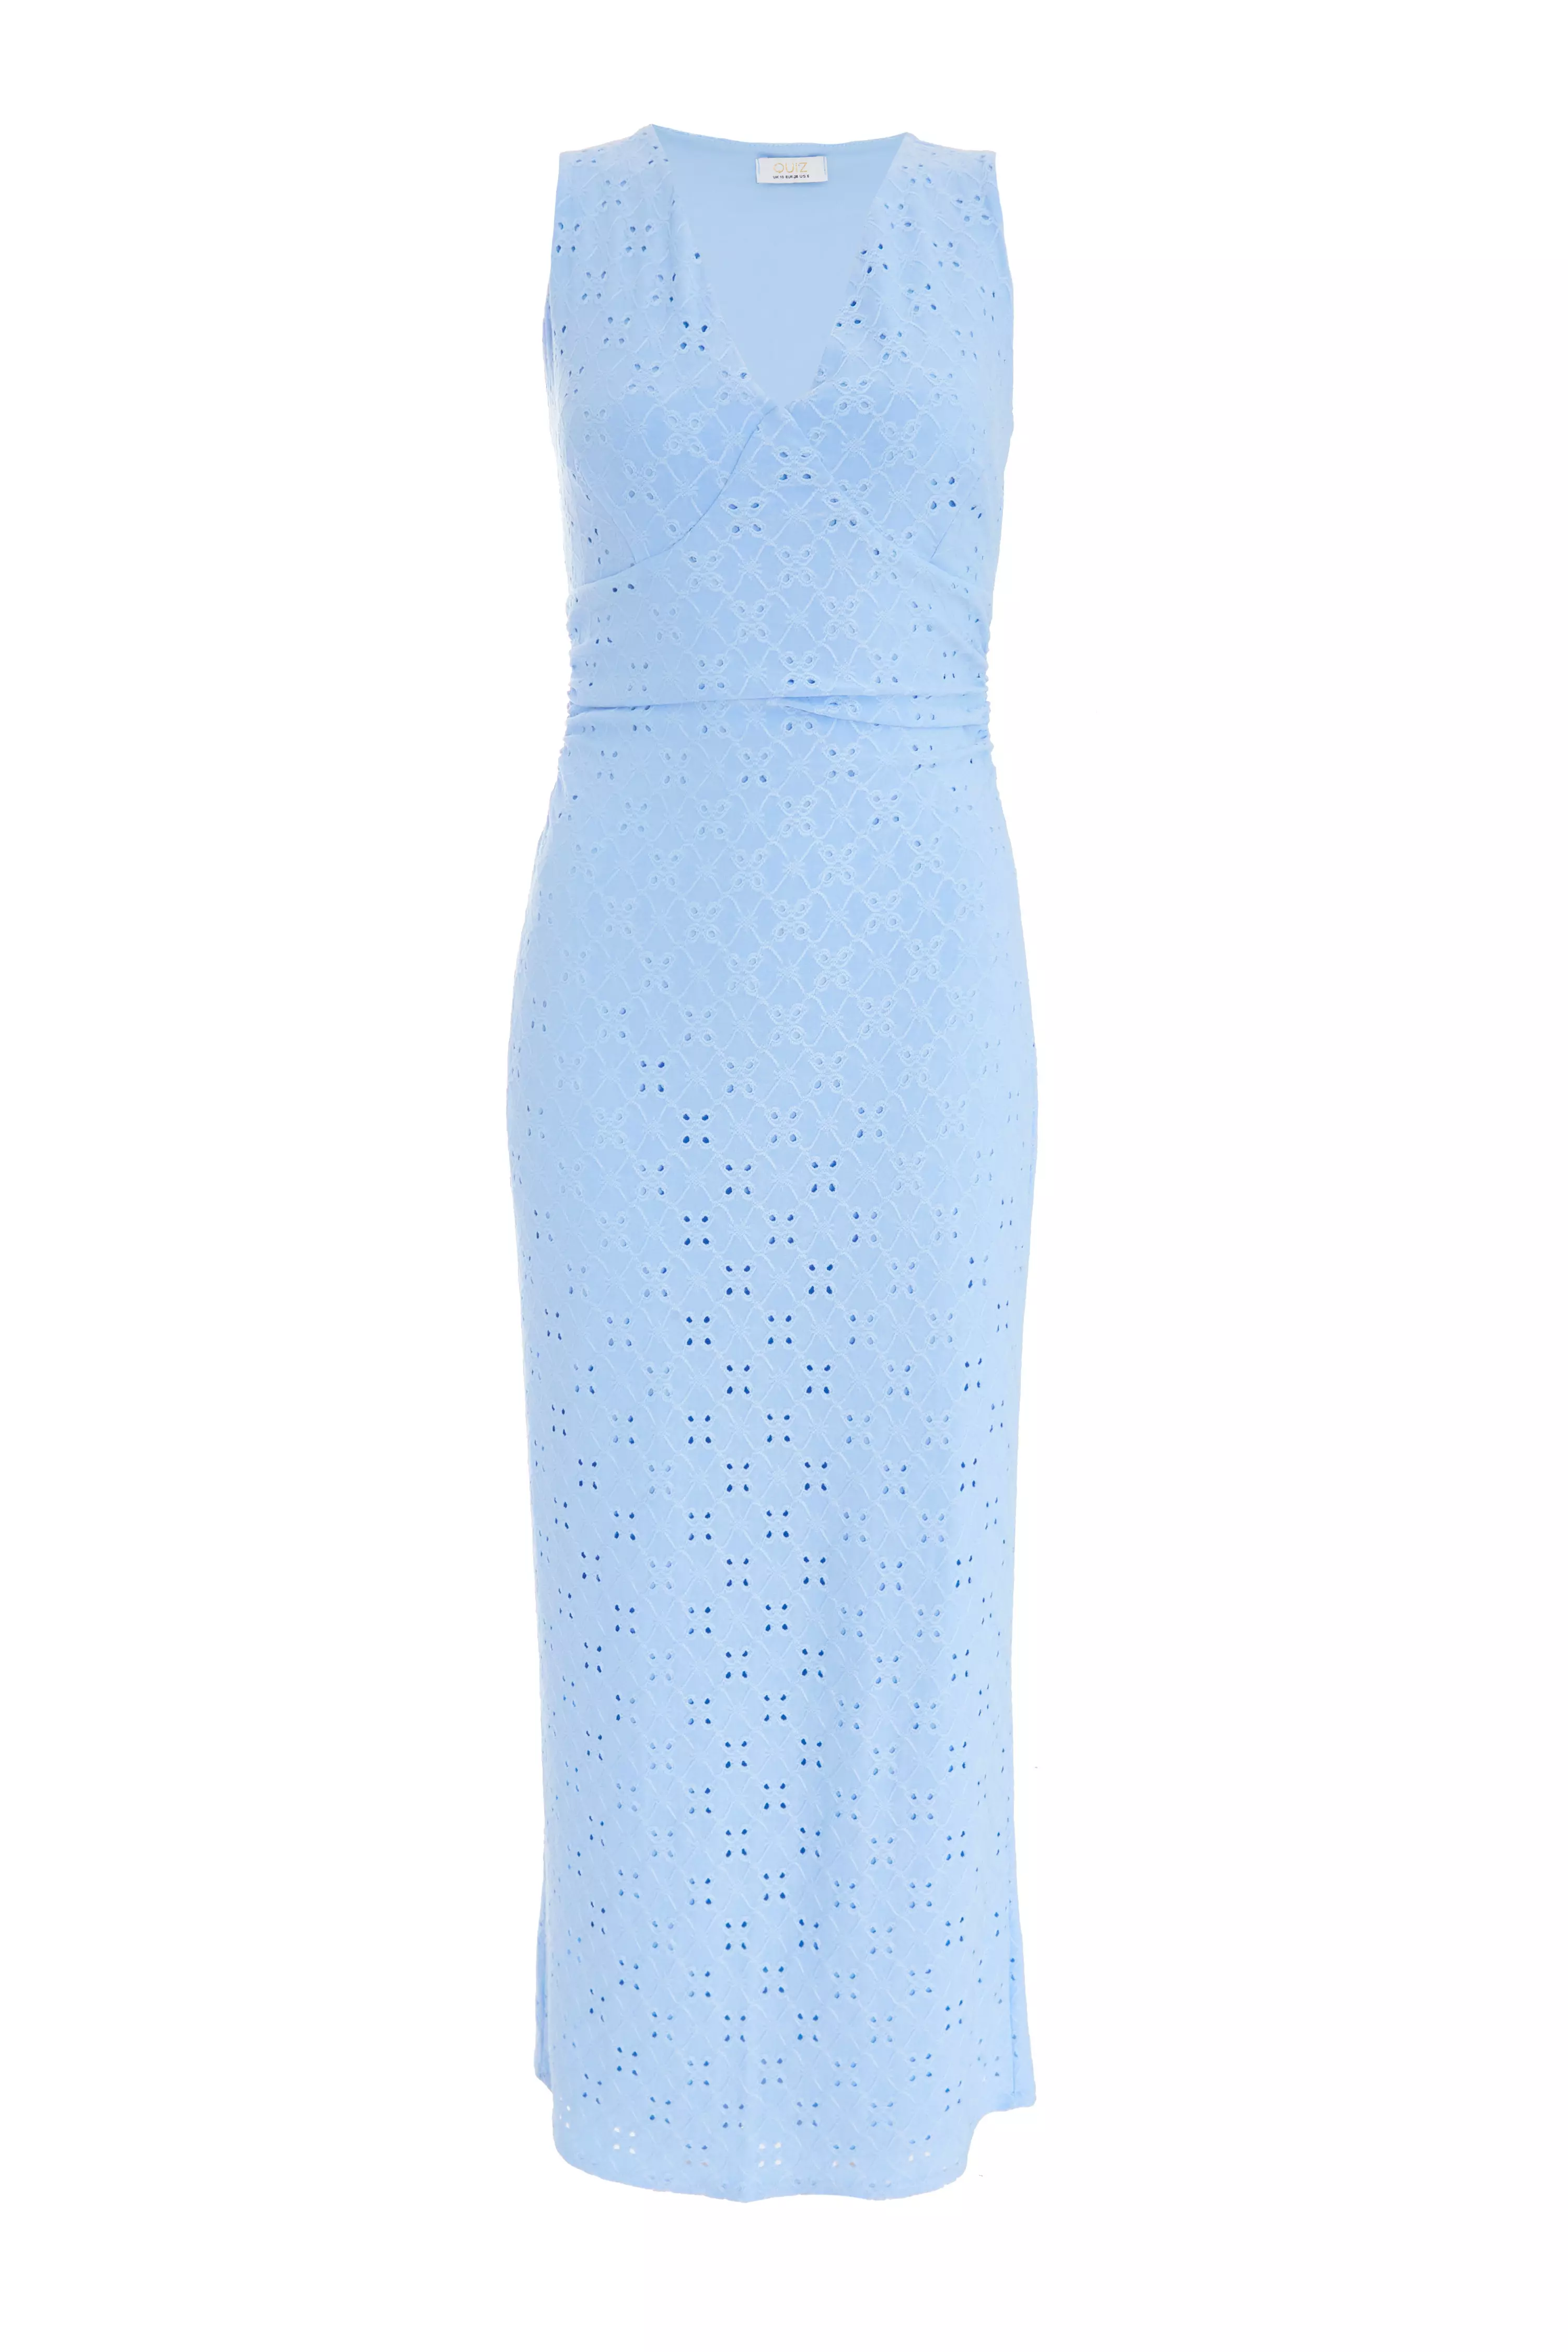 Blue Embroidered Bodycon Midaxi Dress